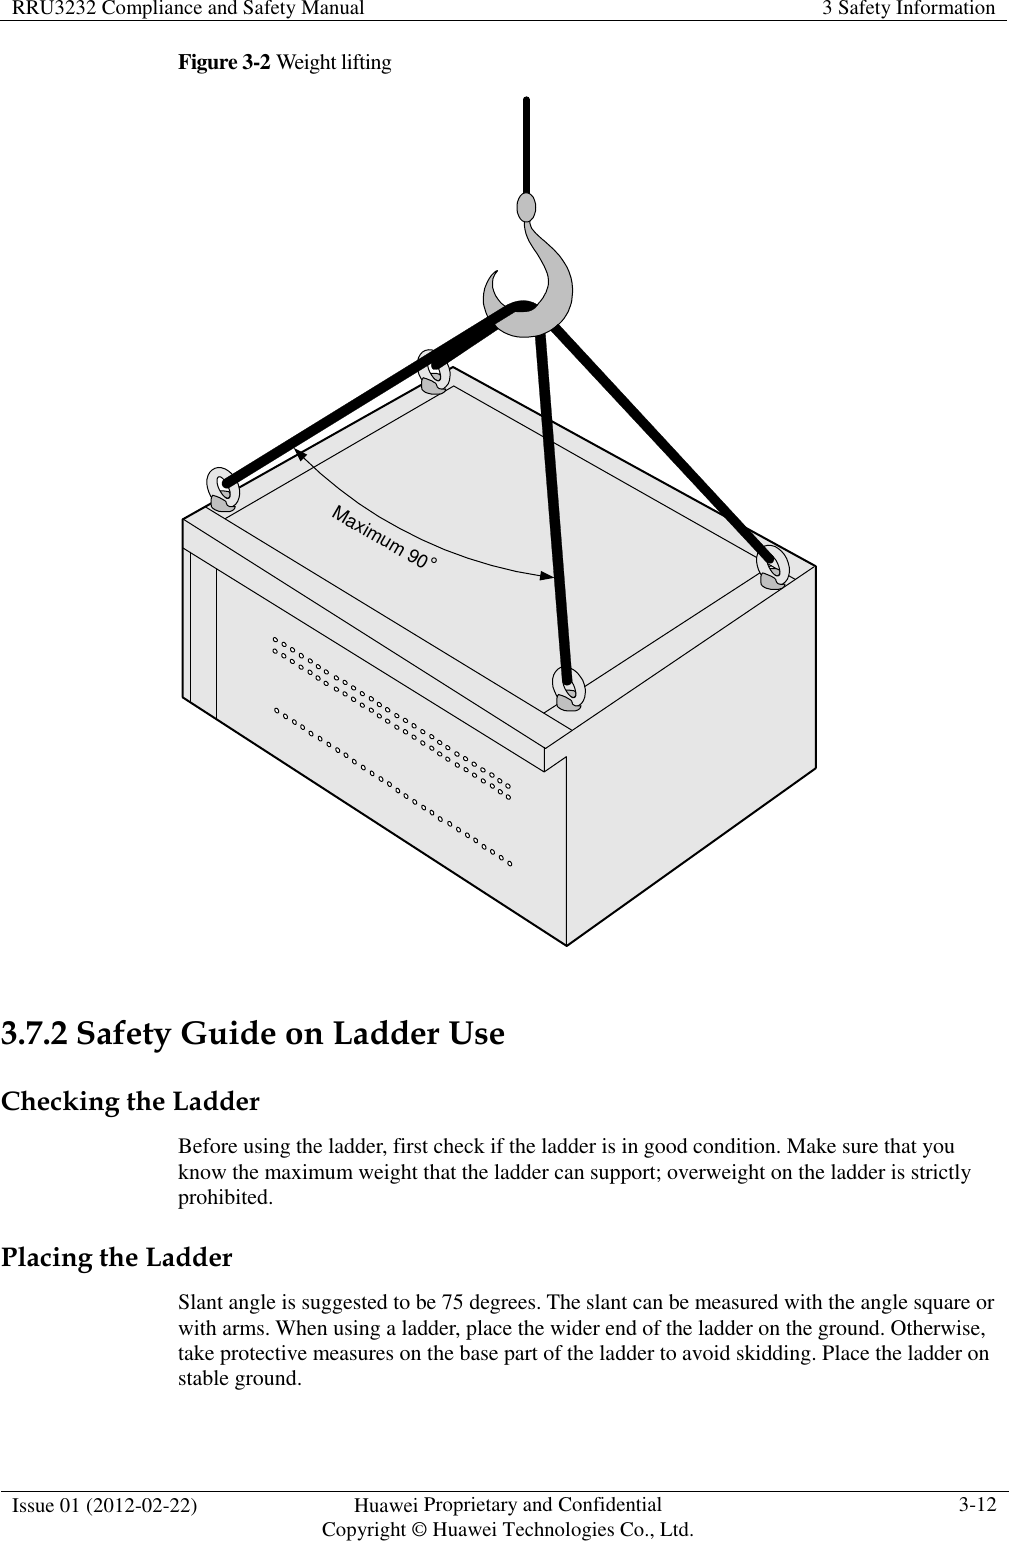 RRU3232 Compliance and Safety Manual  3 Safety Information  Issue 01 (2012-02-22)  Huawei Proprietary and Confidential           Copyright © Huawei Technologies Co., Ltd. 3-12  Figure 3-2 Weight lifting Maximum 90°  3.7.2 Safety Guide on Ladder Use Checking the Ladder Before using the ladder, first check if the ladder is in good condition. Make sure that you know the maximum weight that the ladder can support; overweight on the ladder is strictly prohibited. Placing the Ladder Slant angle is suggested to be 75 degrees. The slant can be measured with the angle square or with arms. When using a ladder, place the wider end of the ladder on the ground. Otherwise, take protective measures on the base part of the ladder to avoid skidding. Place the ladder on stable ground. 